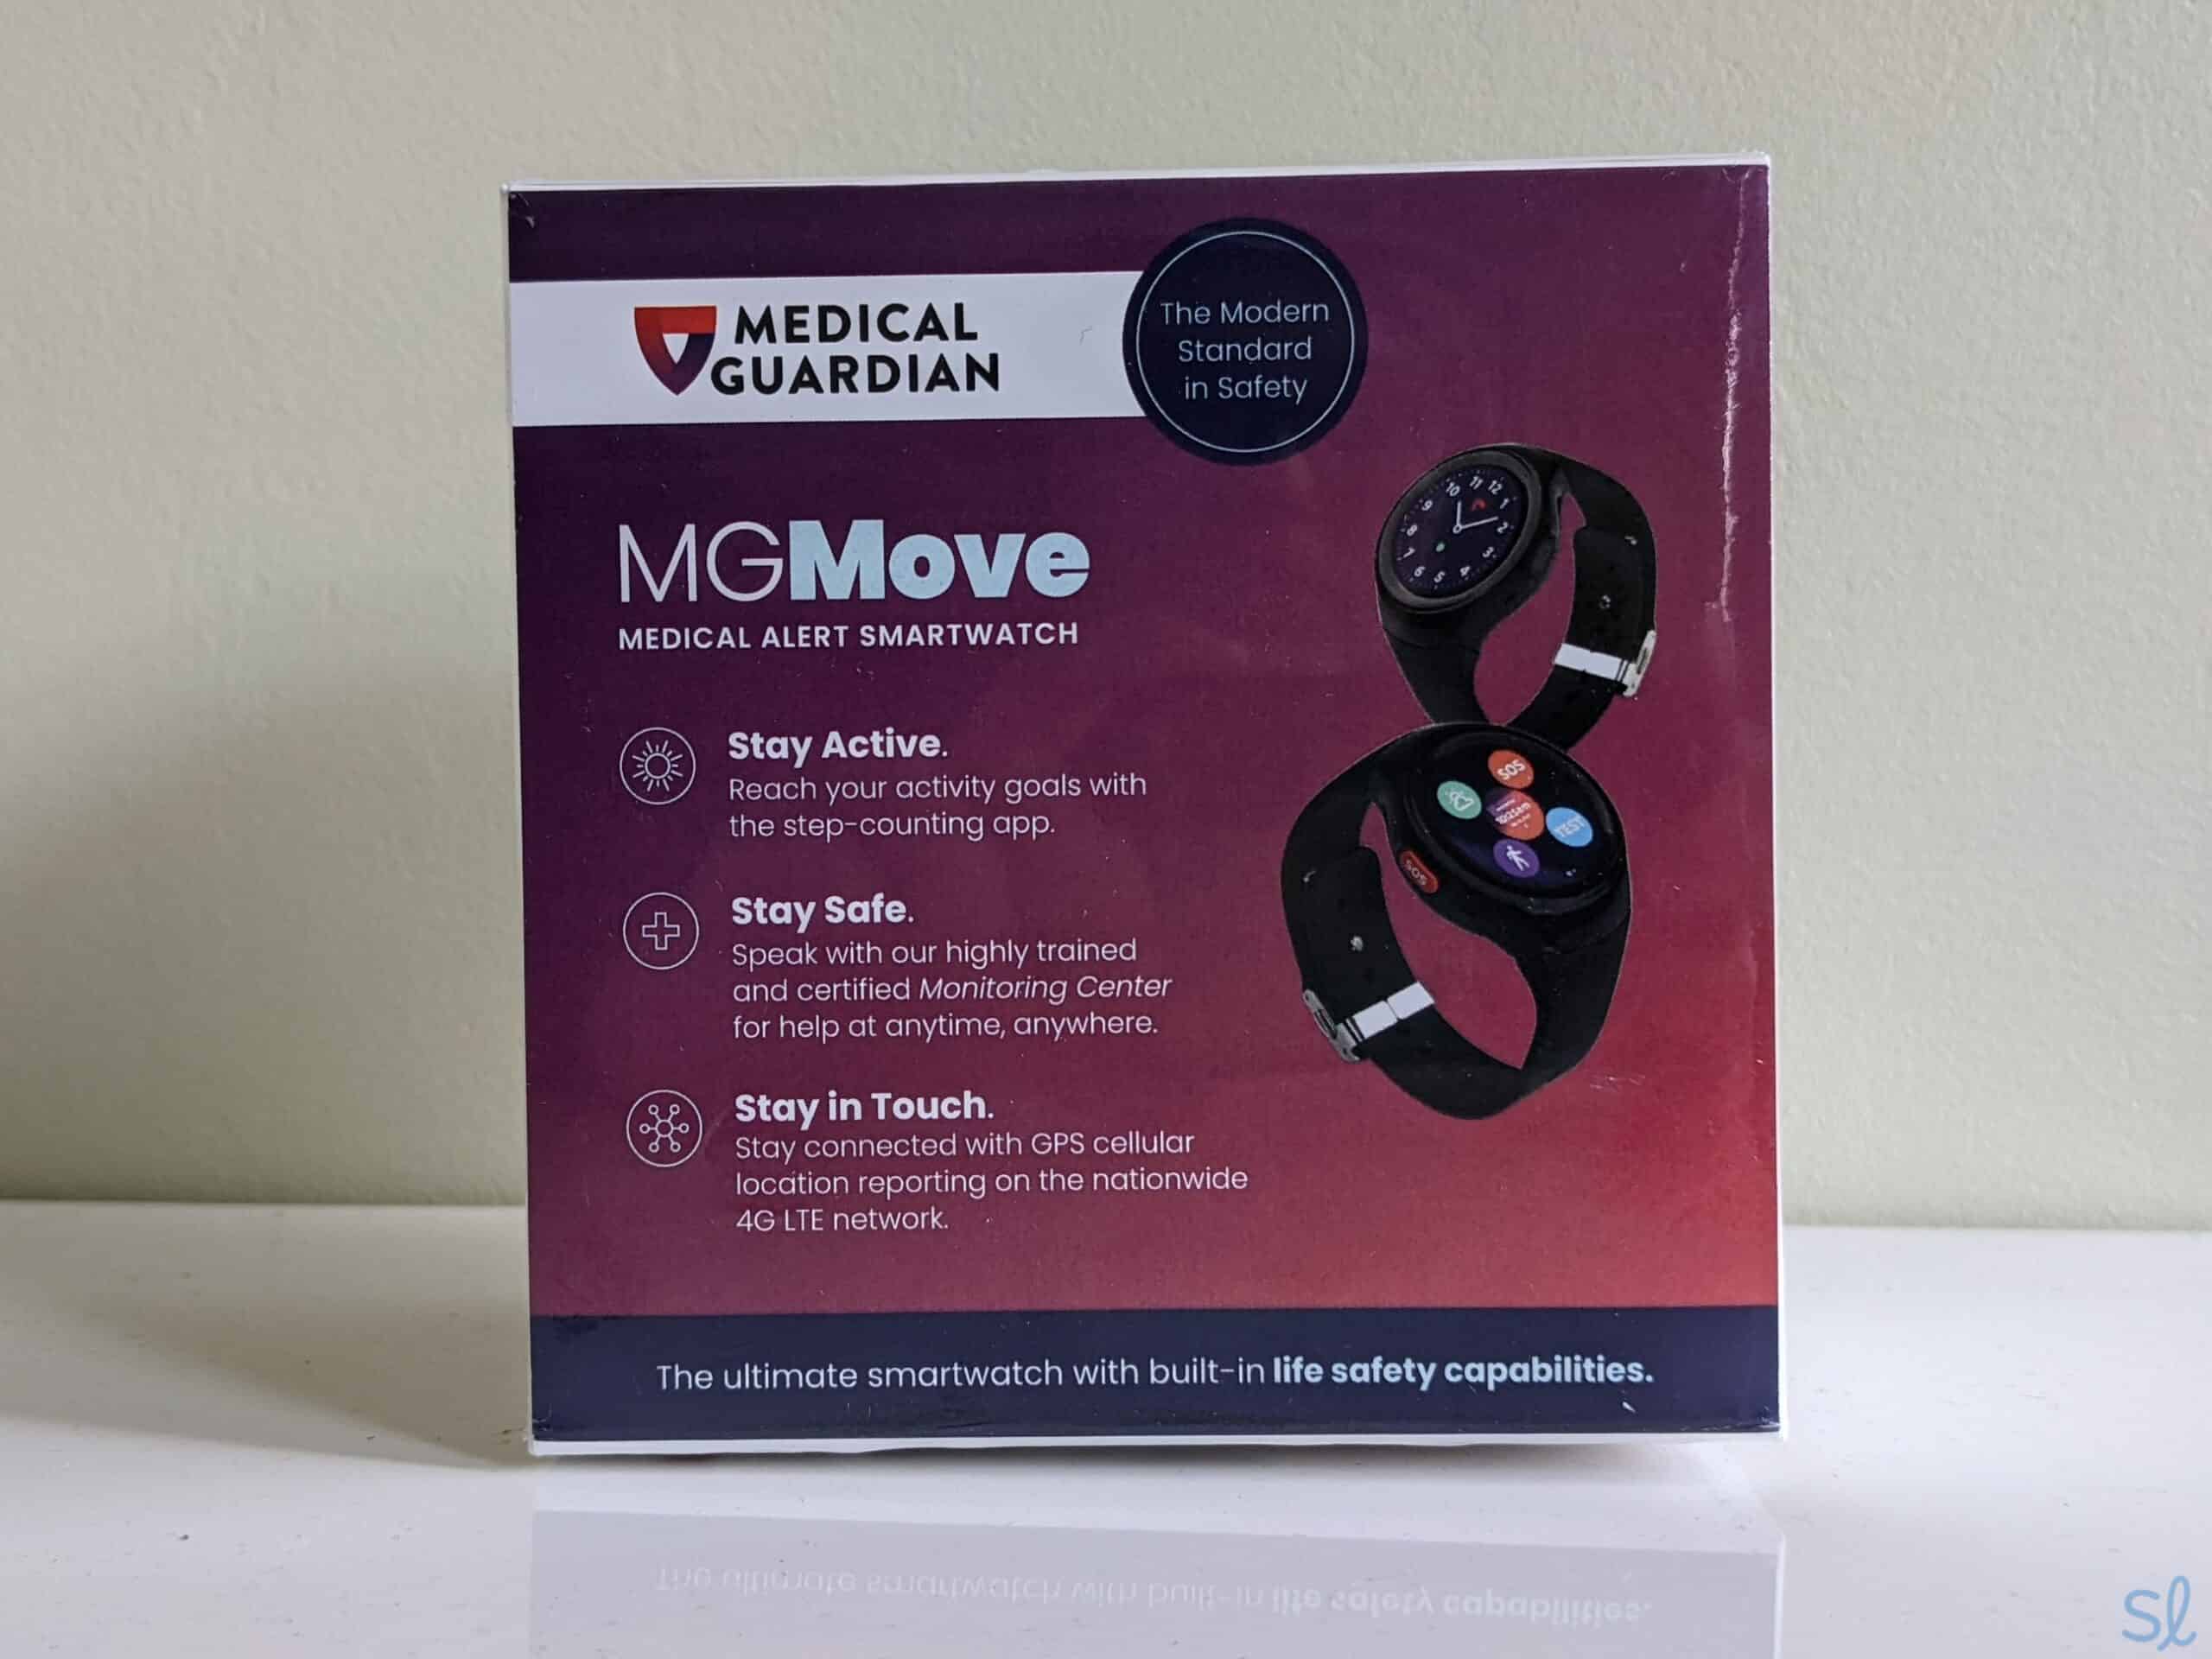 MGMove’s packaging